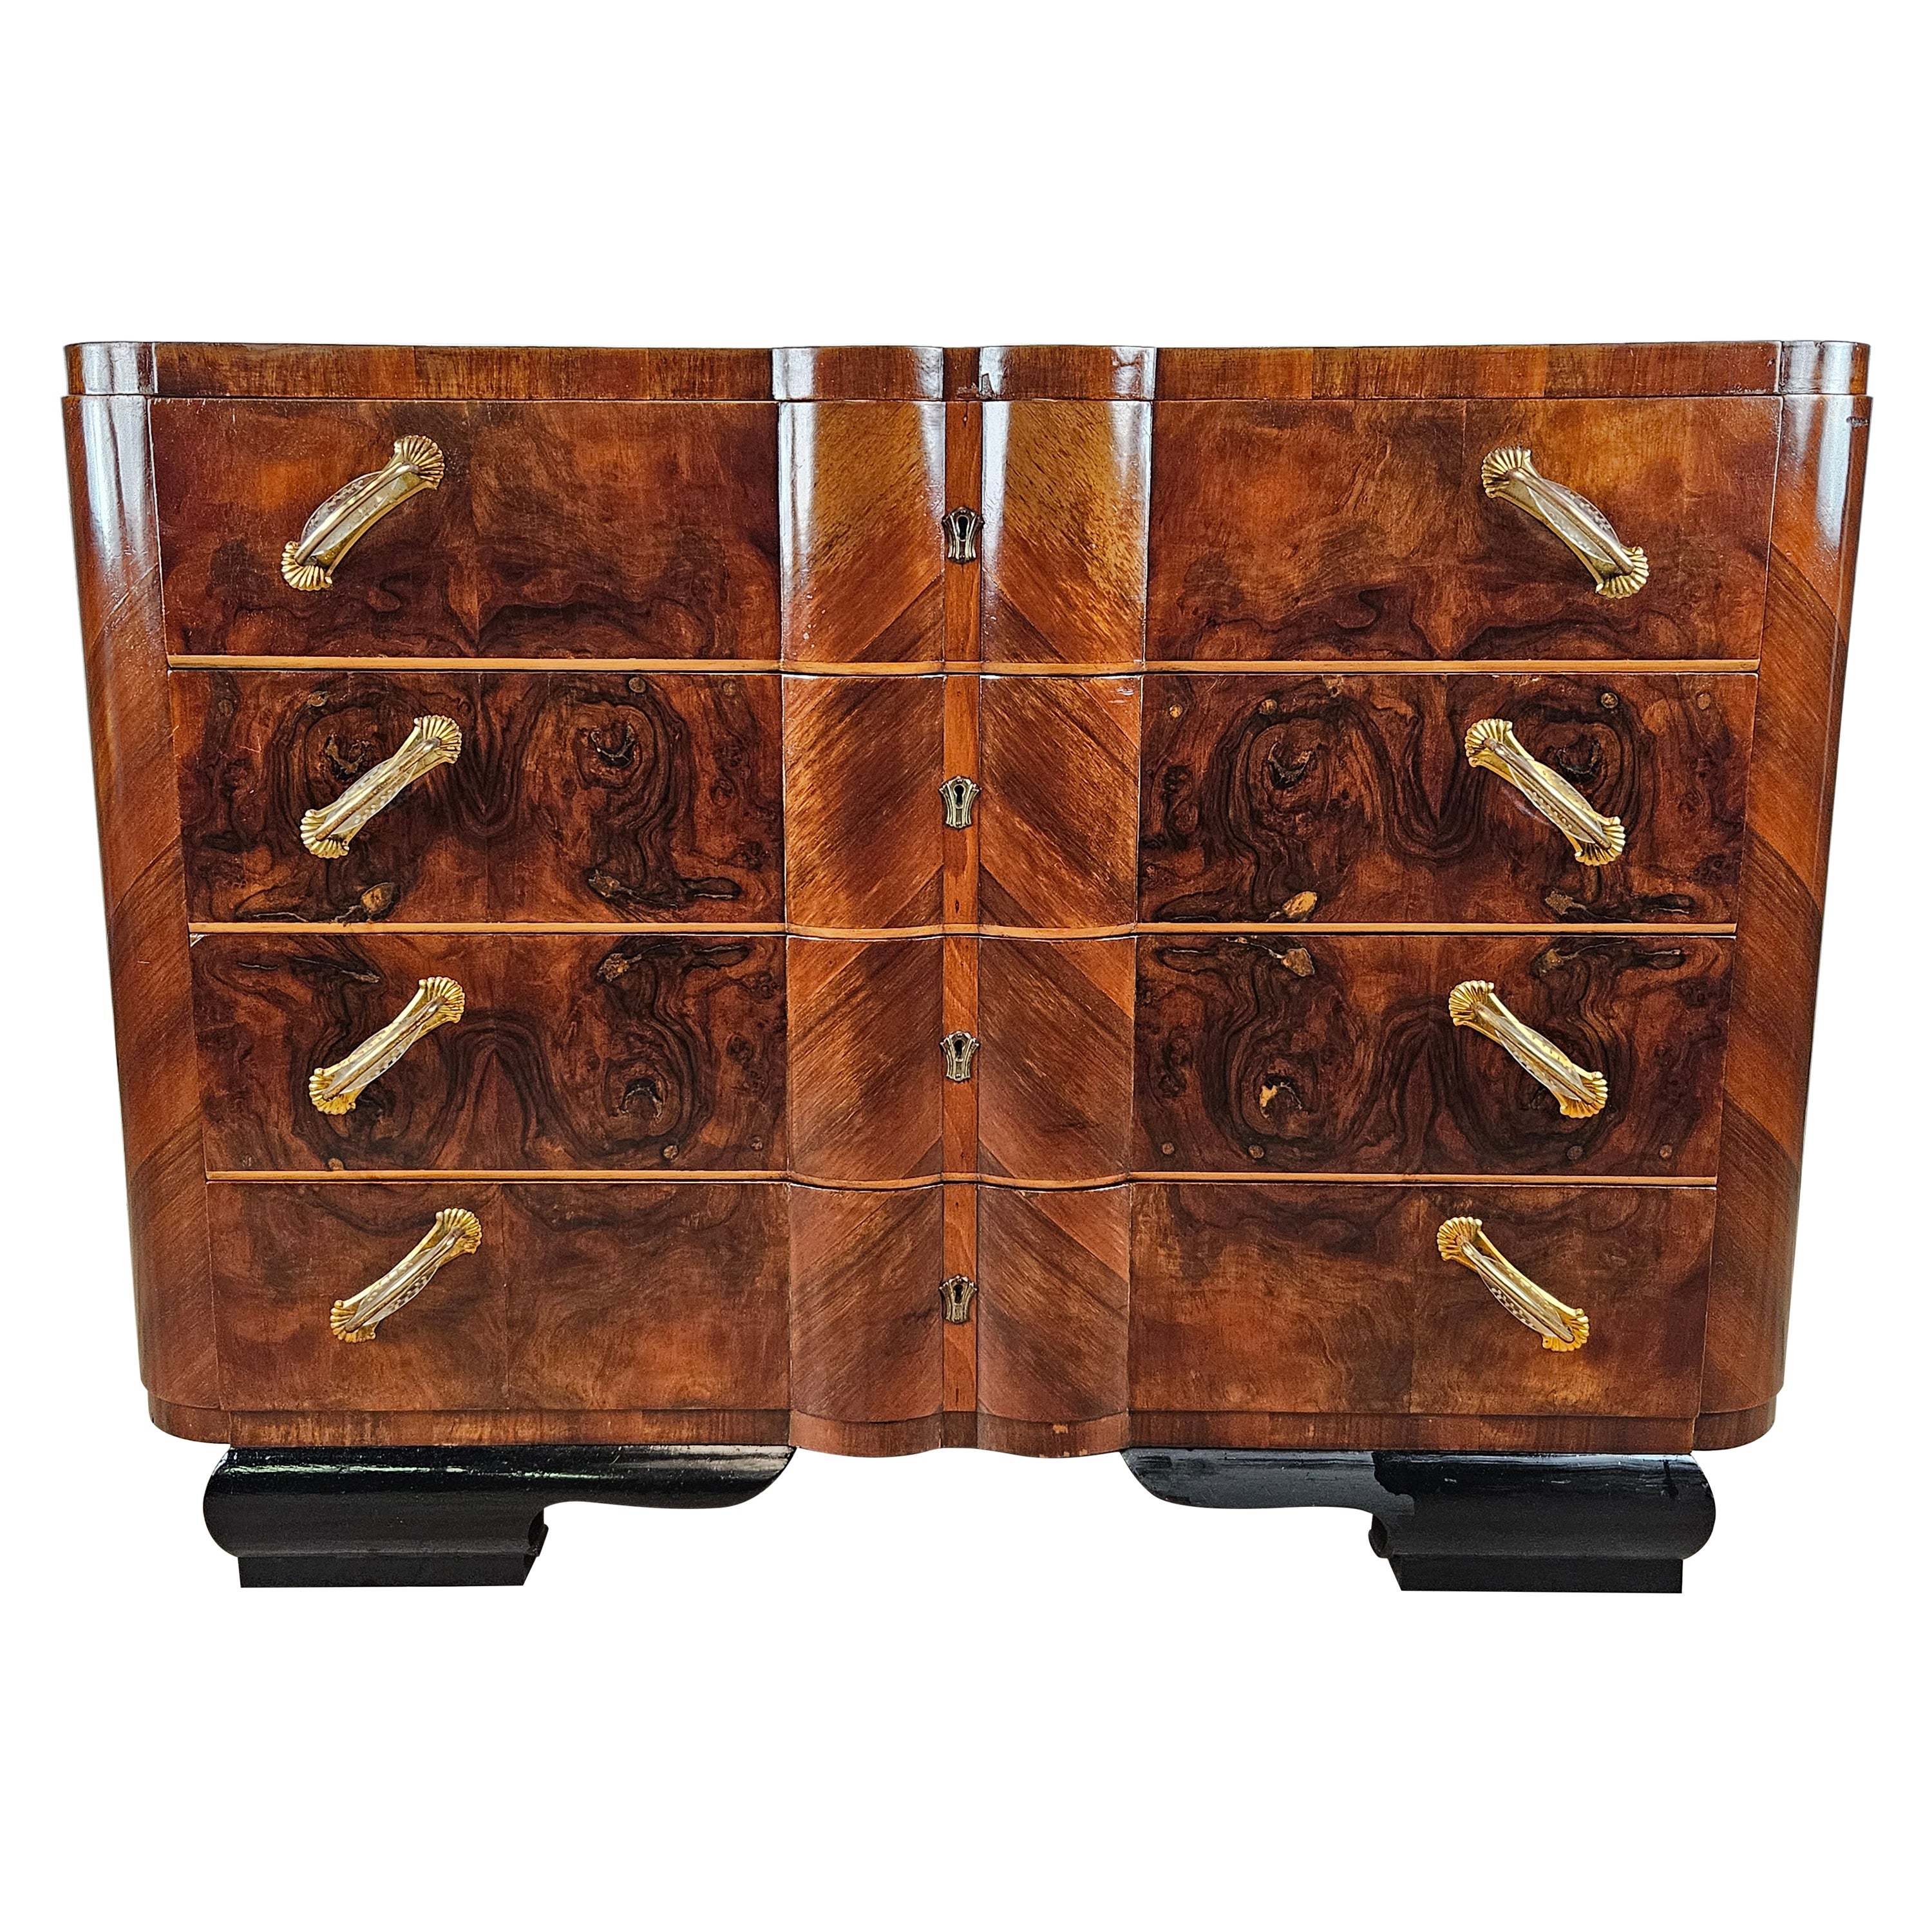 Art Deco walnut burl dresser with lacquered drawers and feet 20th century